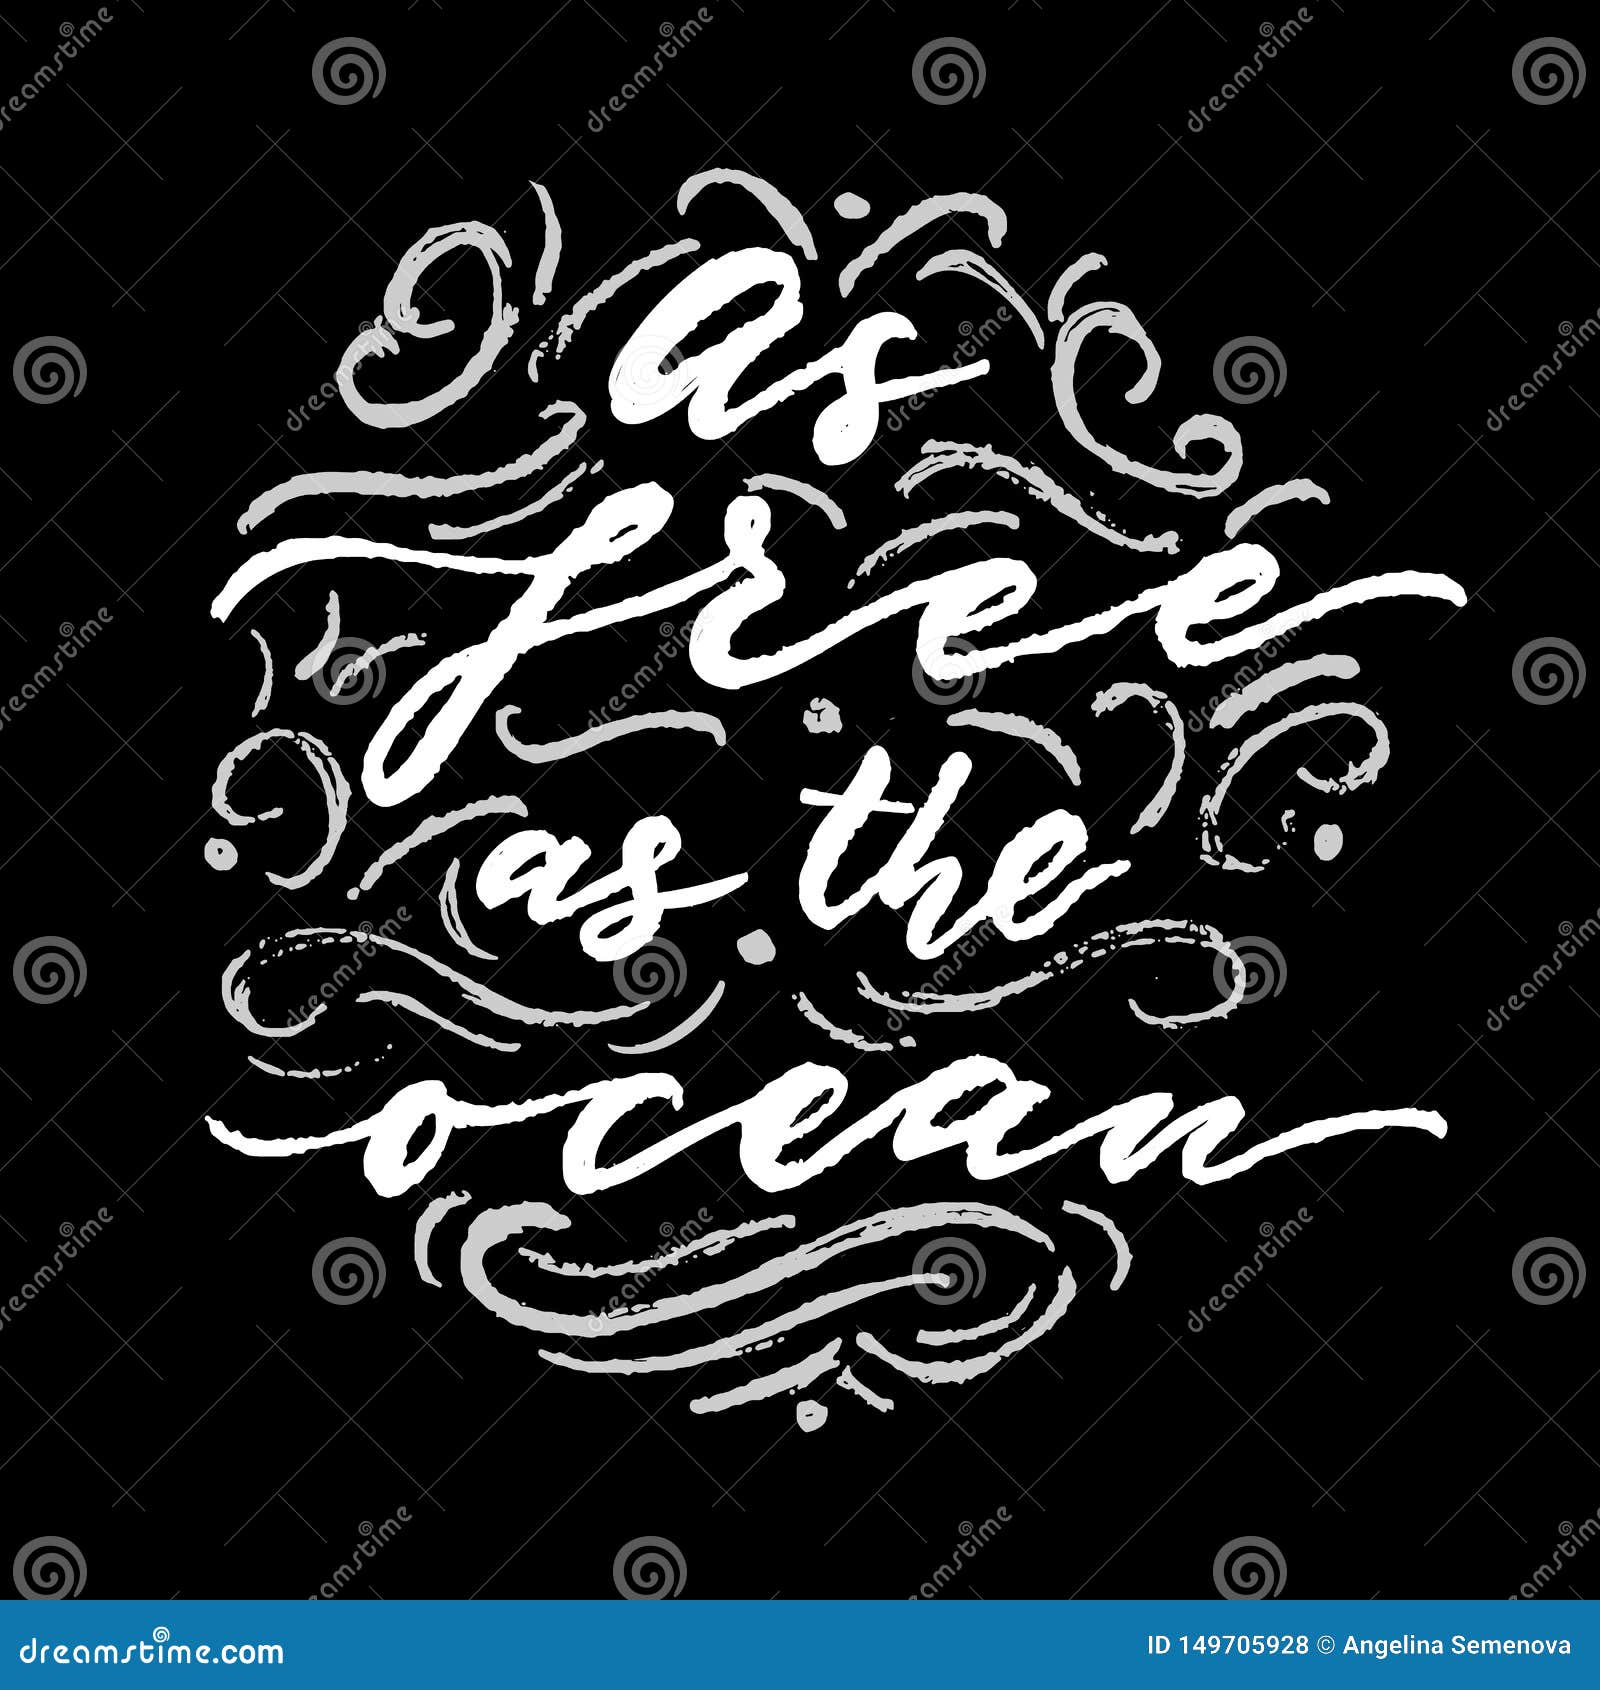 Hand Drawn Lettering Calligraphy Phrase As Free As The Ocean With 